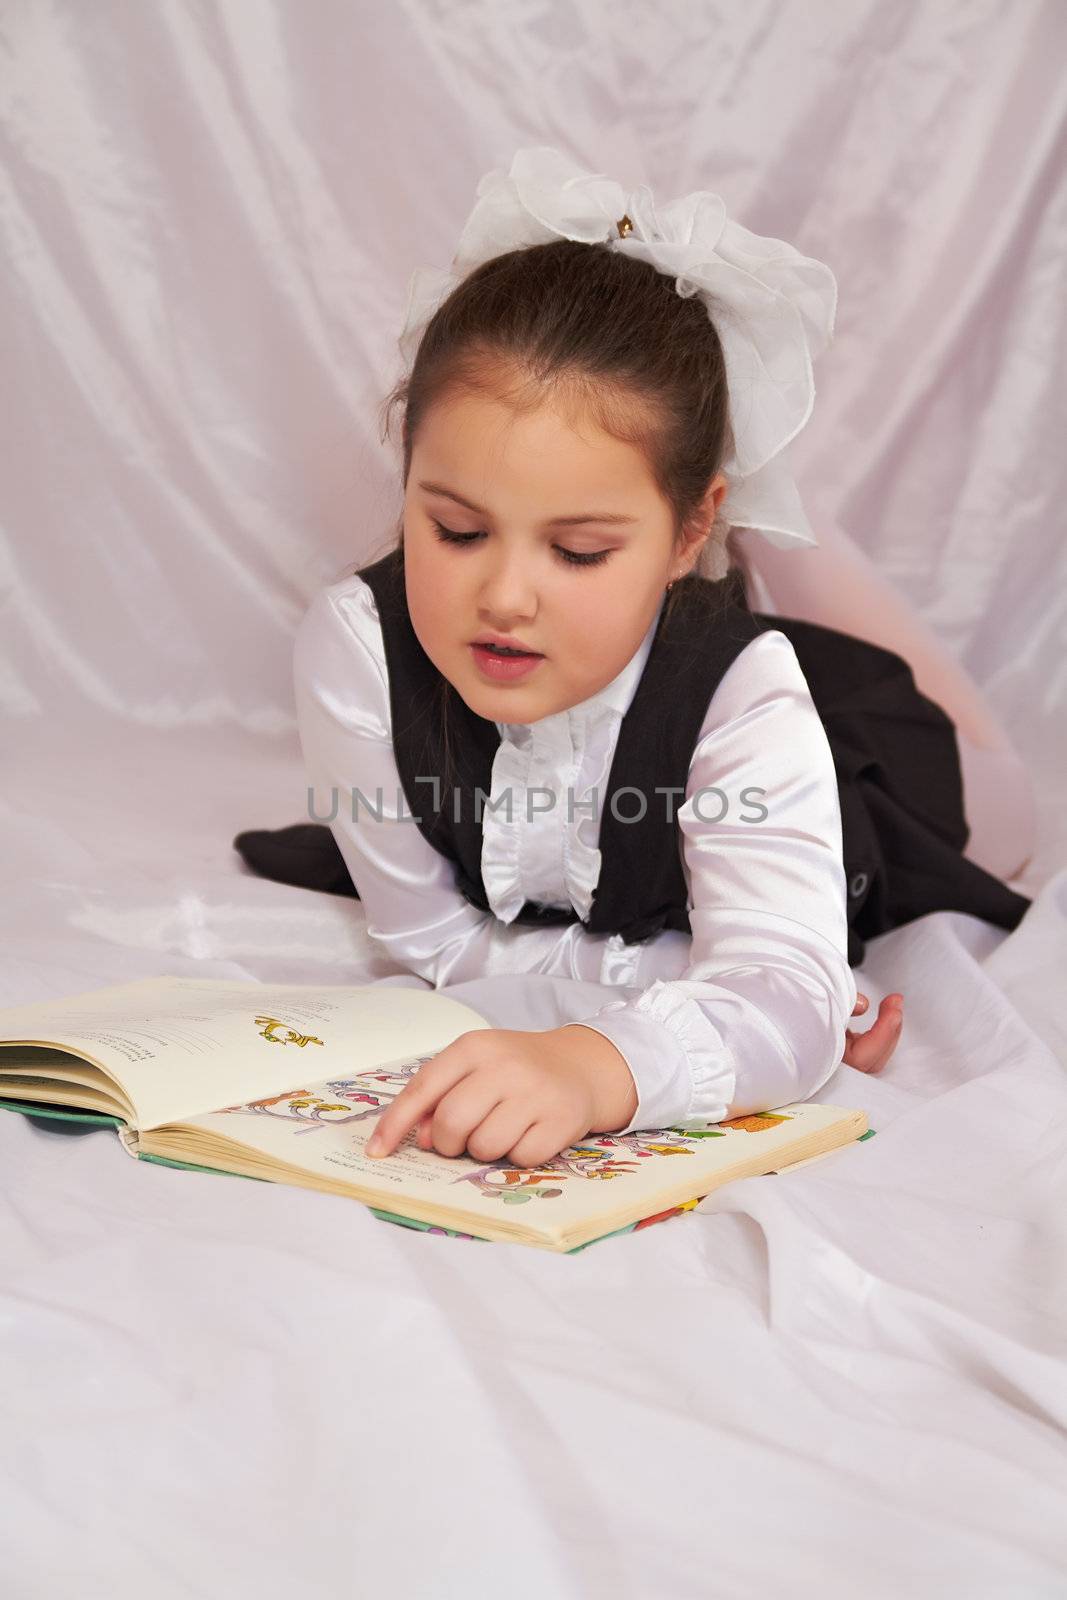 A child reading a book.